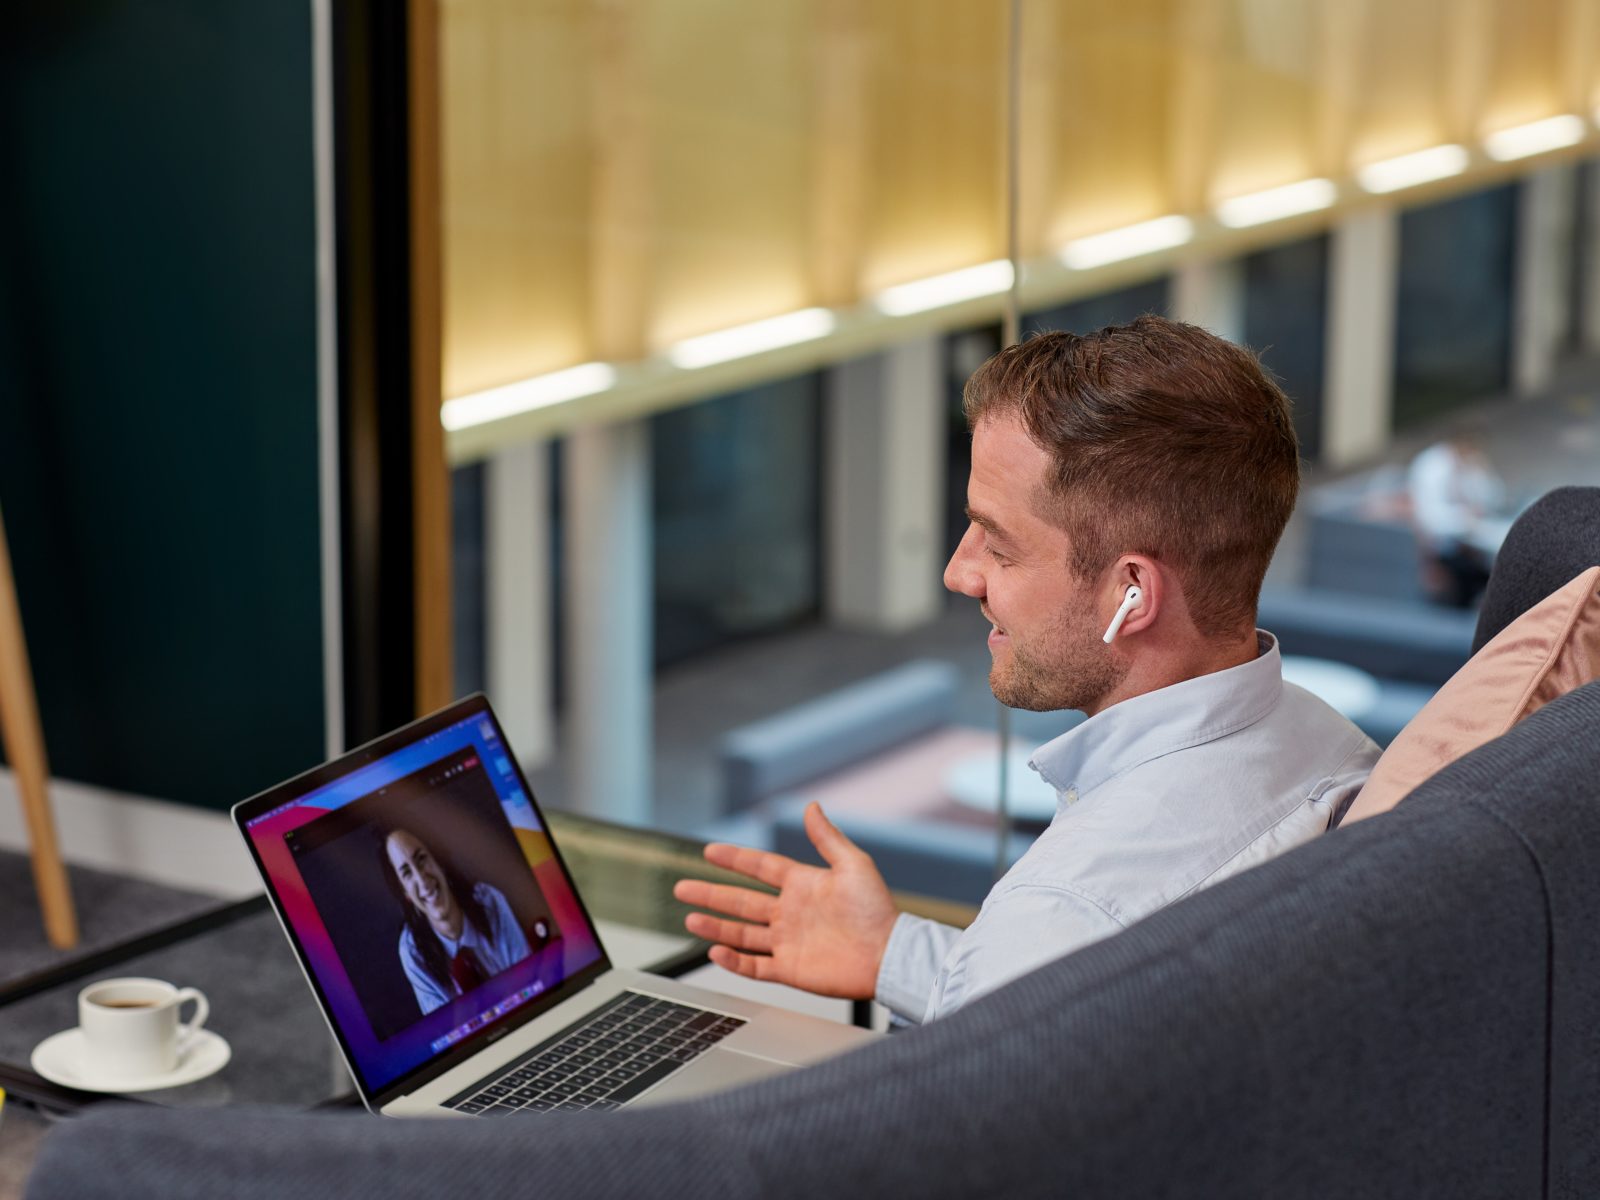 A man answering a video call on his laptop